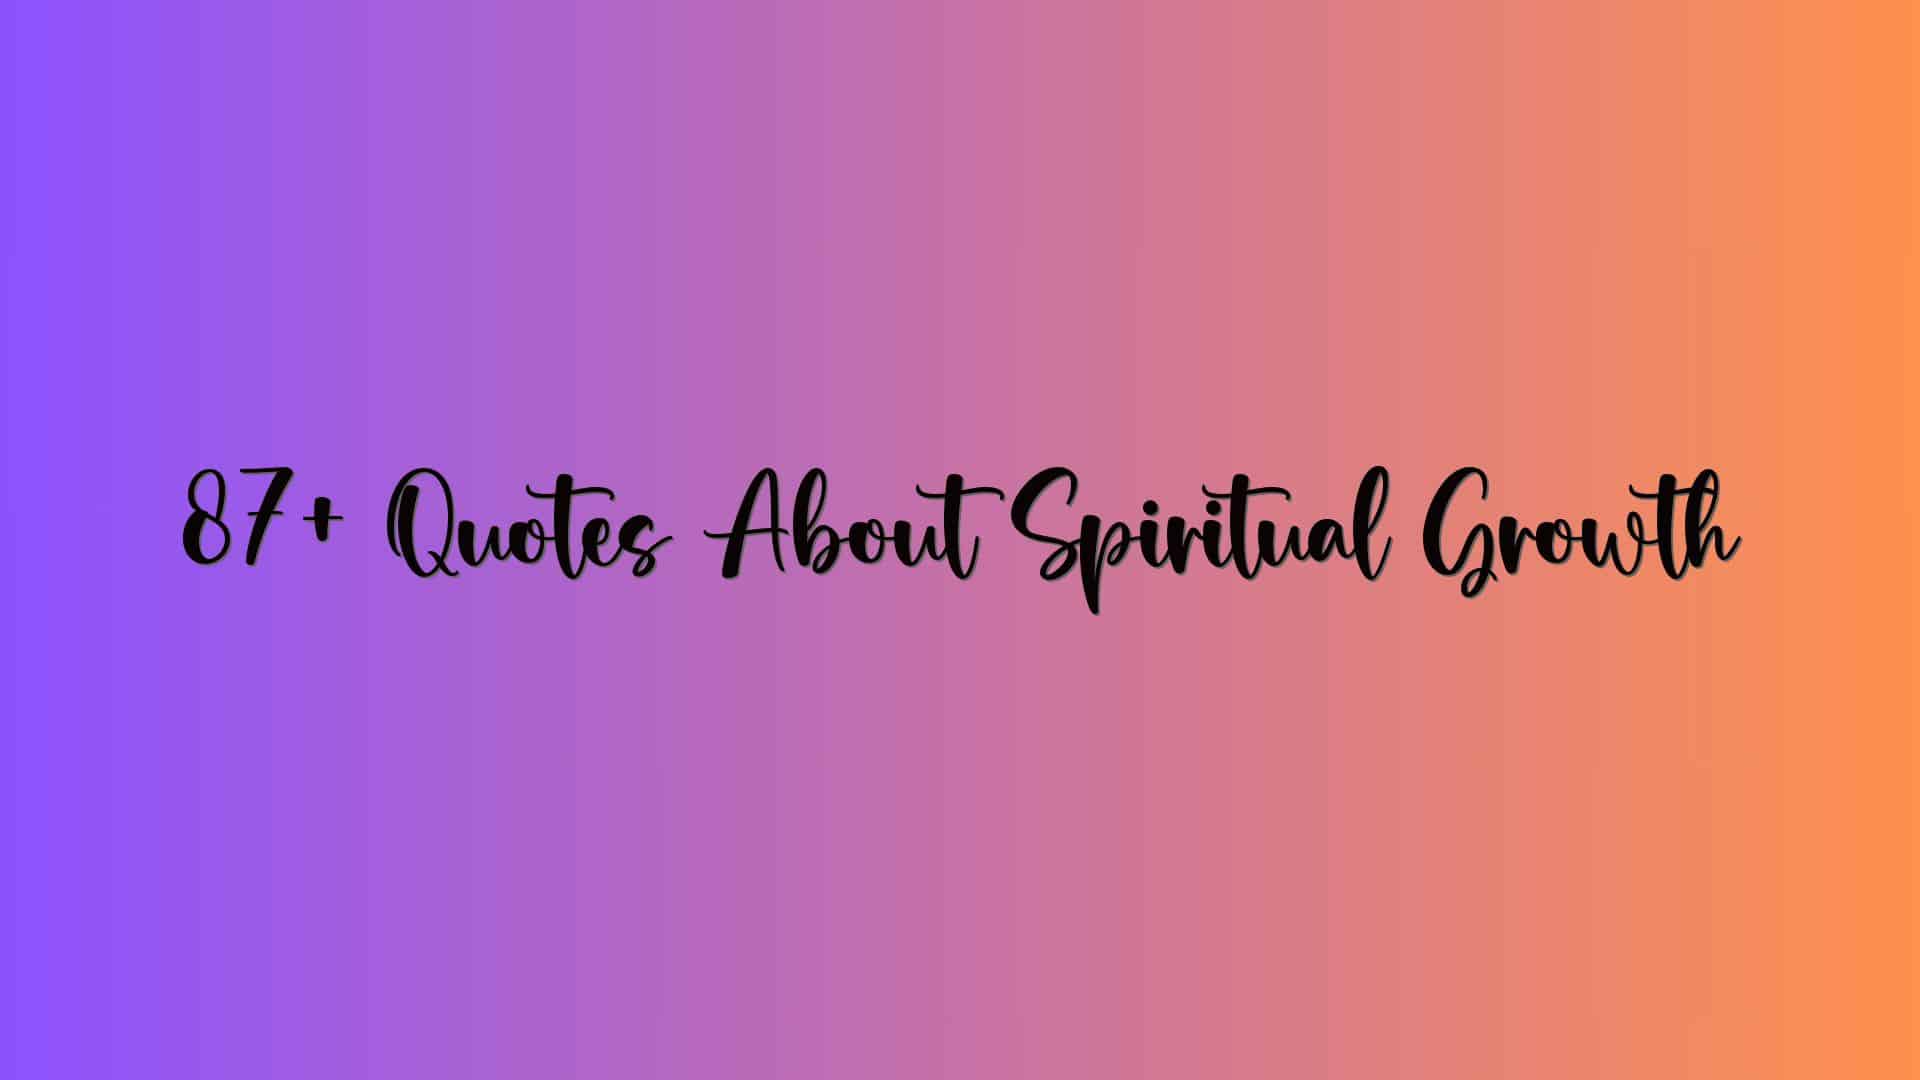 87+ Quotes About Spiritual Growth